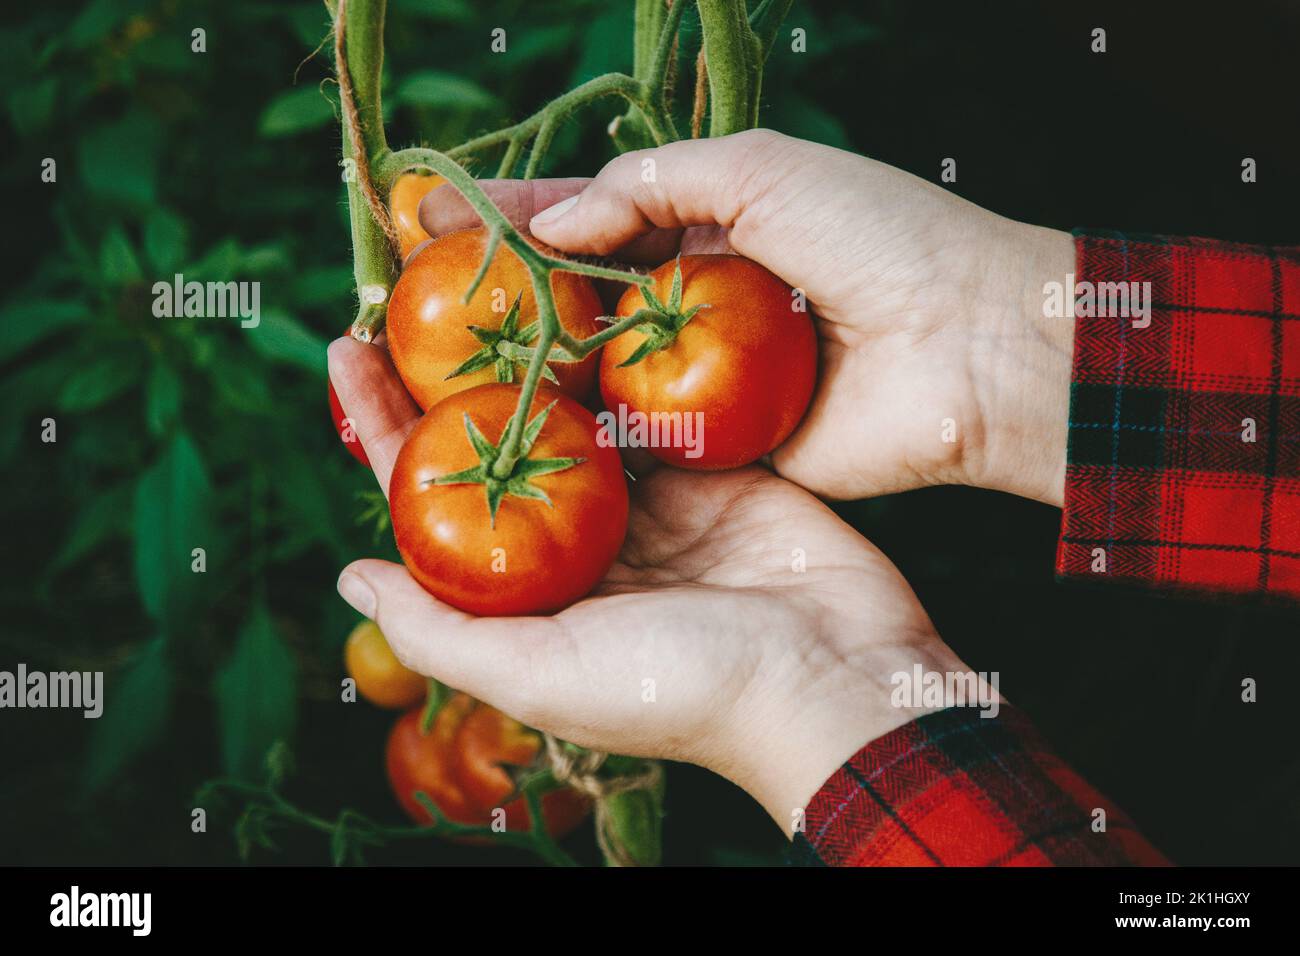 Picking ripe red tomatoes from vine in greenhouse, gardener tomato bunch in hands Stock Photo